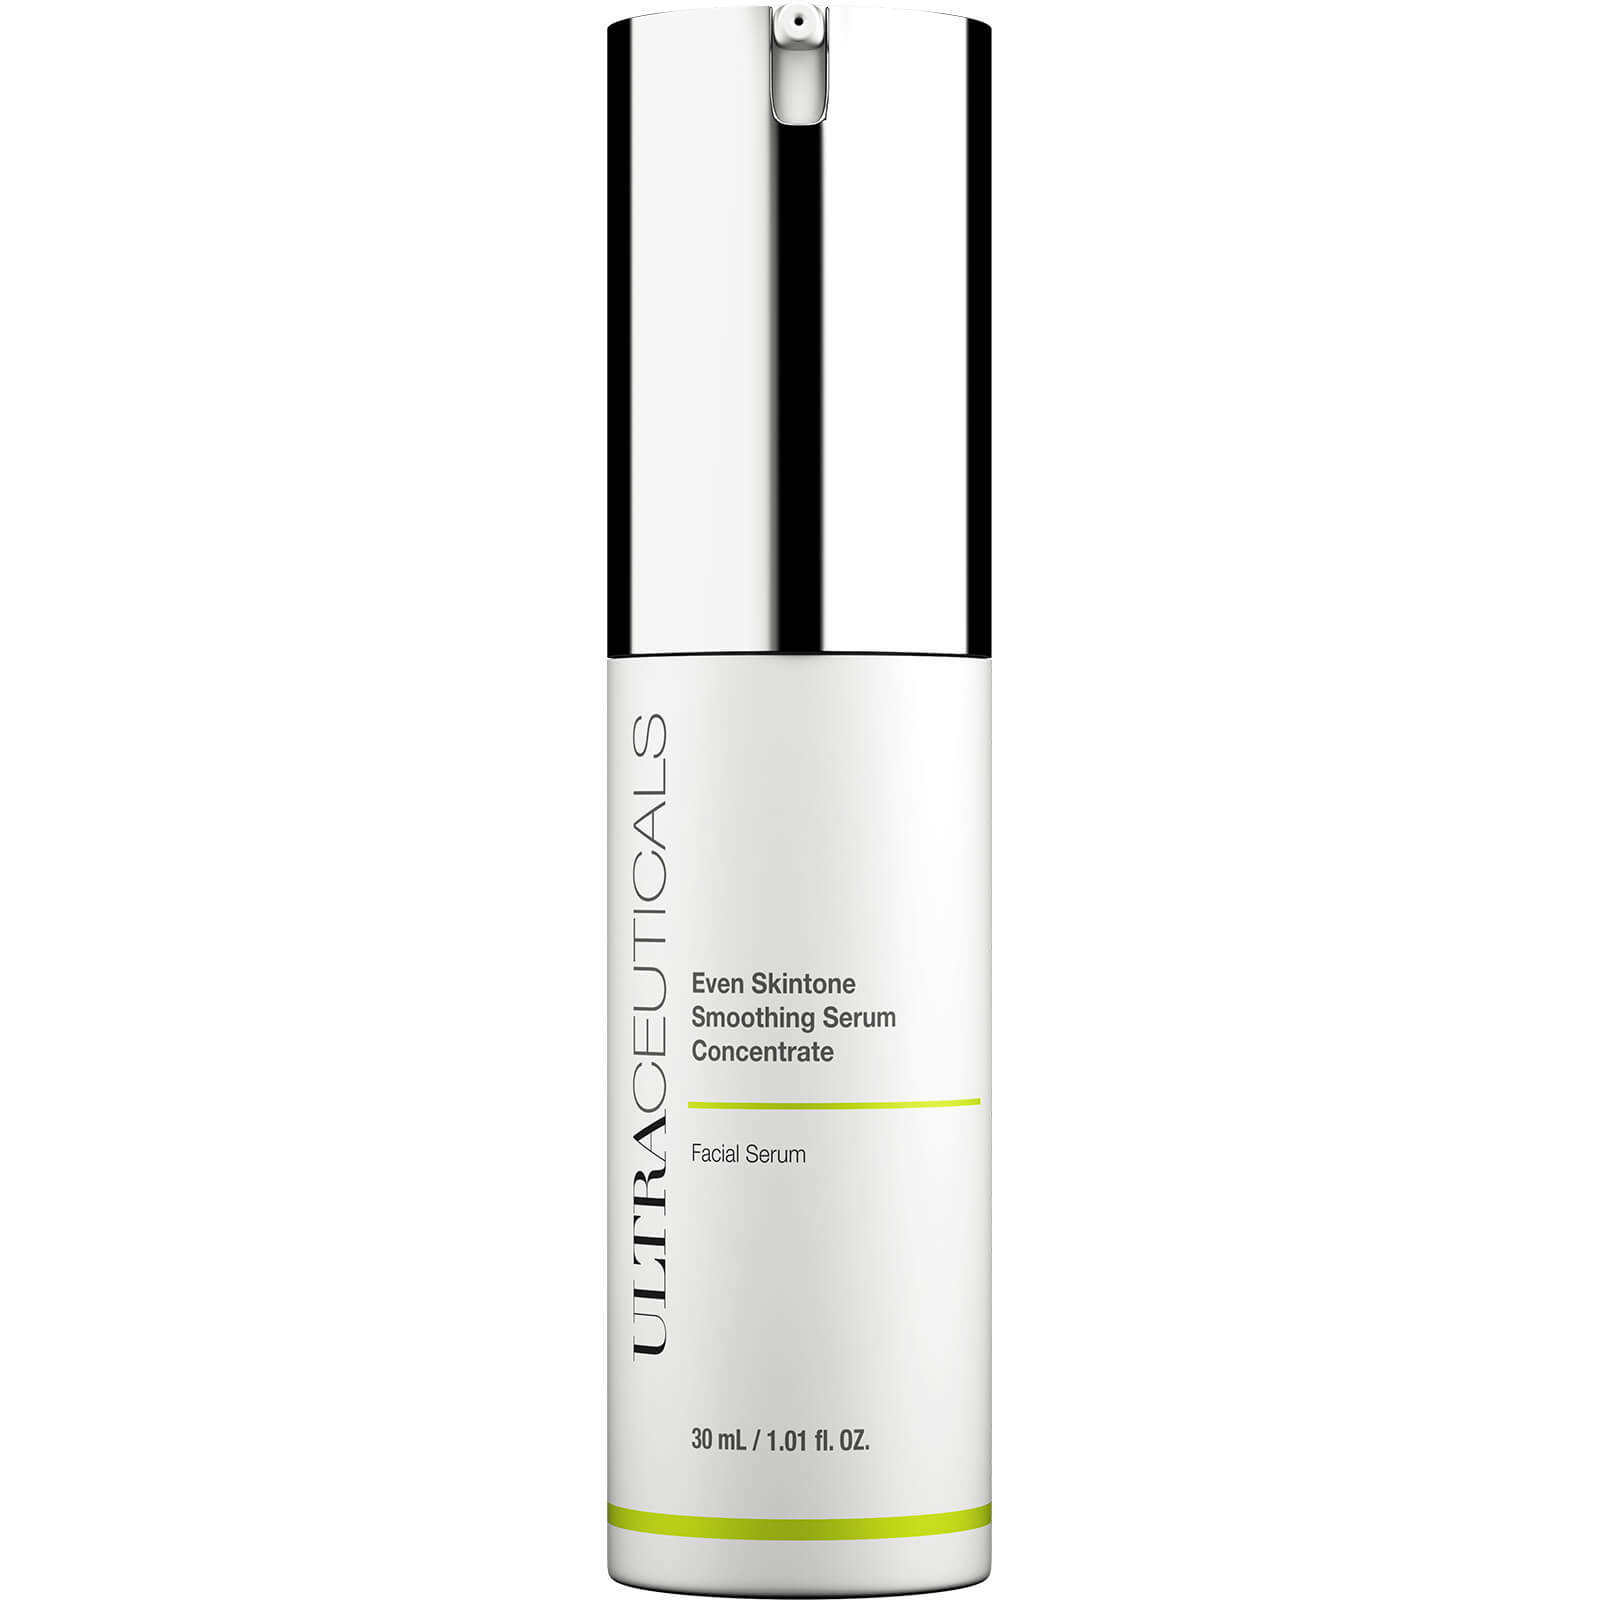 Ultracuticals Range from SkinSister, Even Skintone Smoothing Serum Concentrate